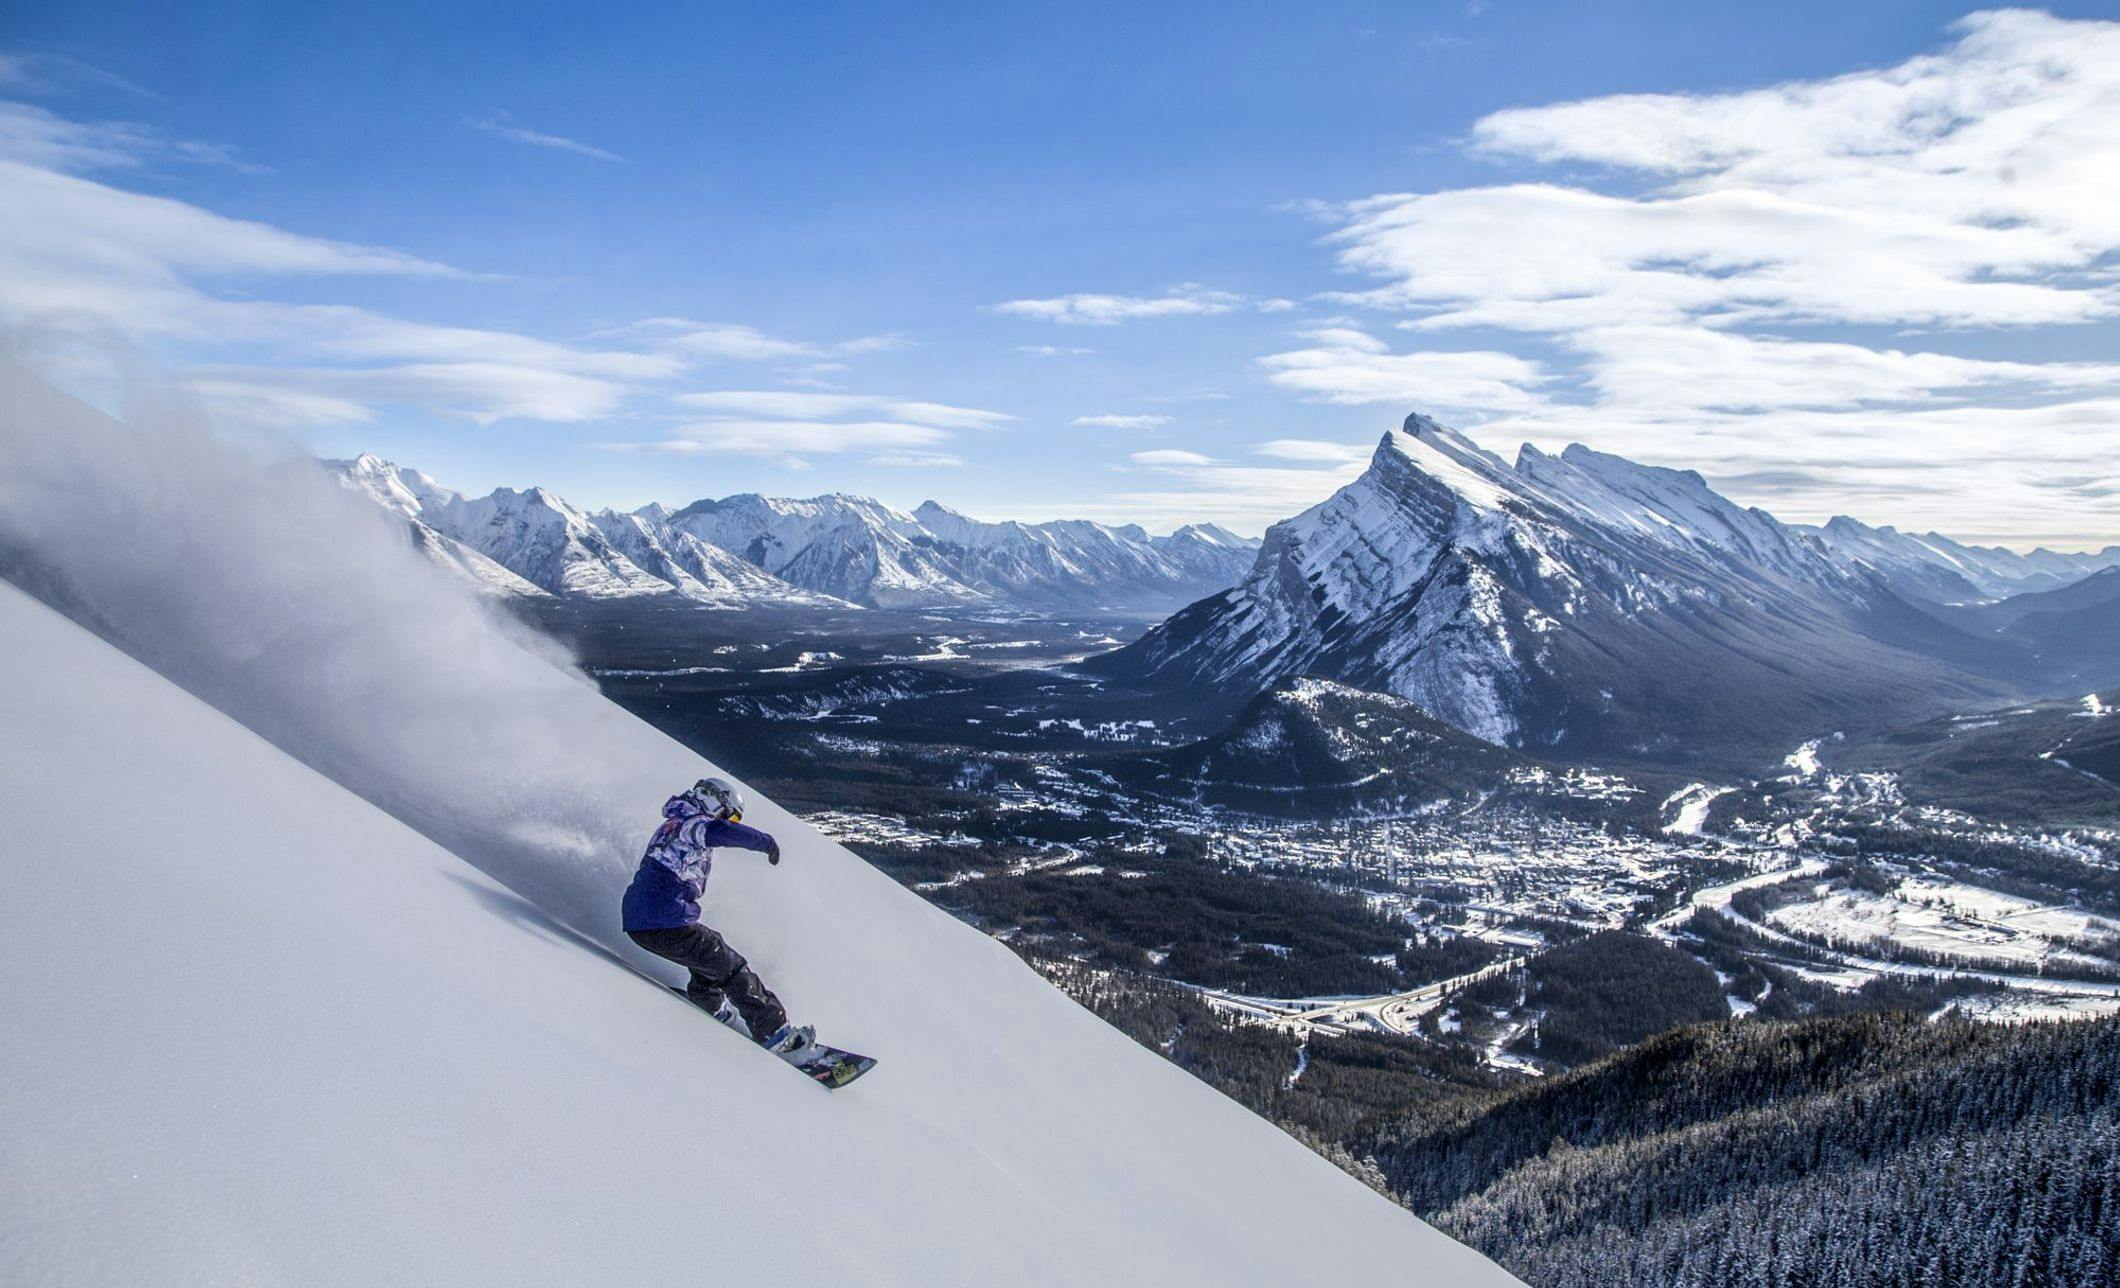 A young snowboarder racing down the mountain with the town of Banff in the background below